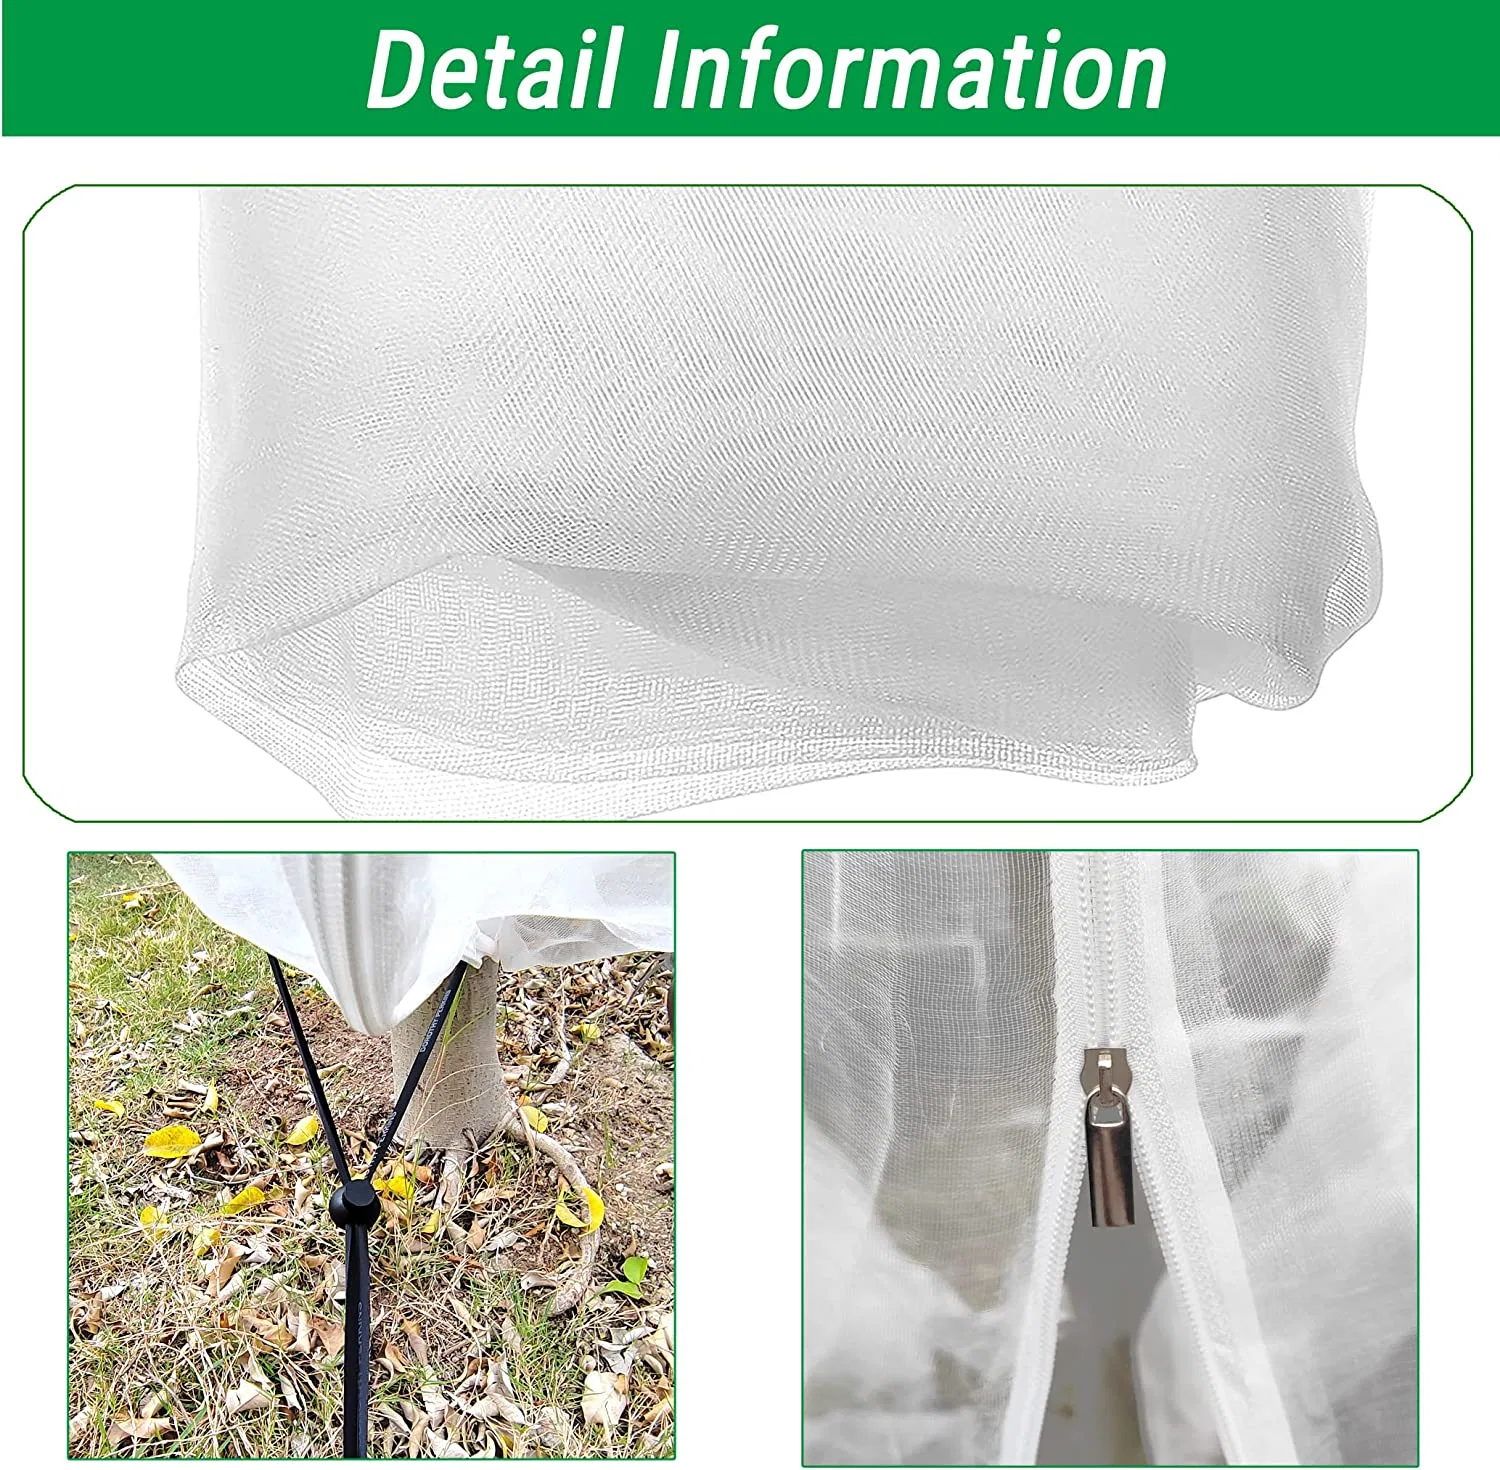 China Manufactory Wholesale/Supplier Fruit Nets Mesh Fruit Protector, Reusable Garden Mesh Bag with Drawstring, for Plants, Fruits, Vegetables, Green, White